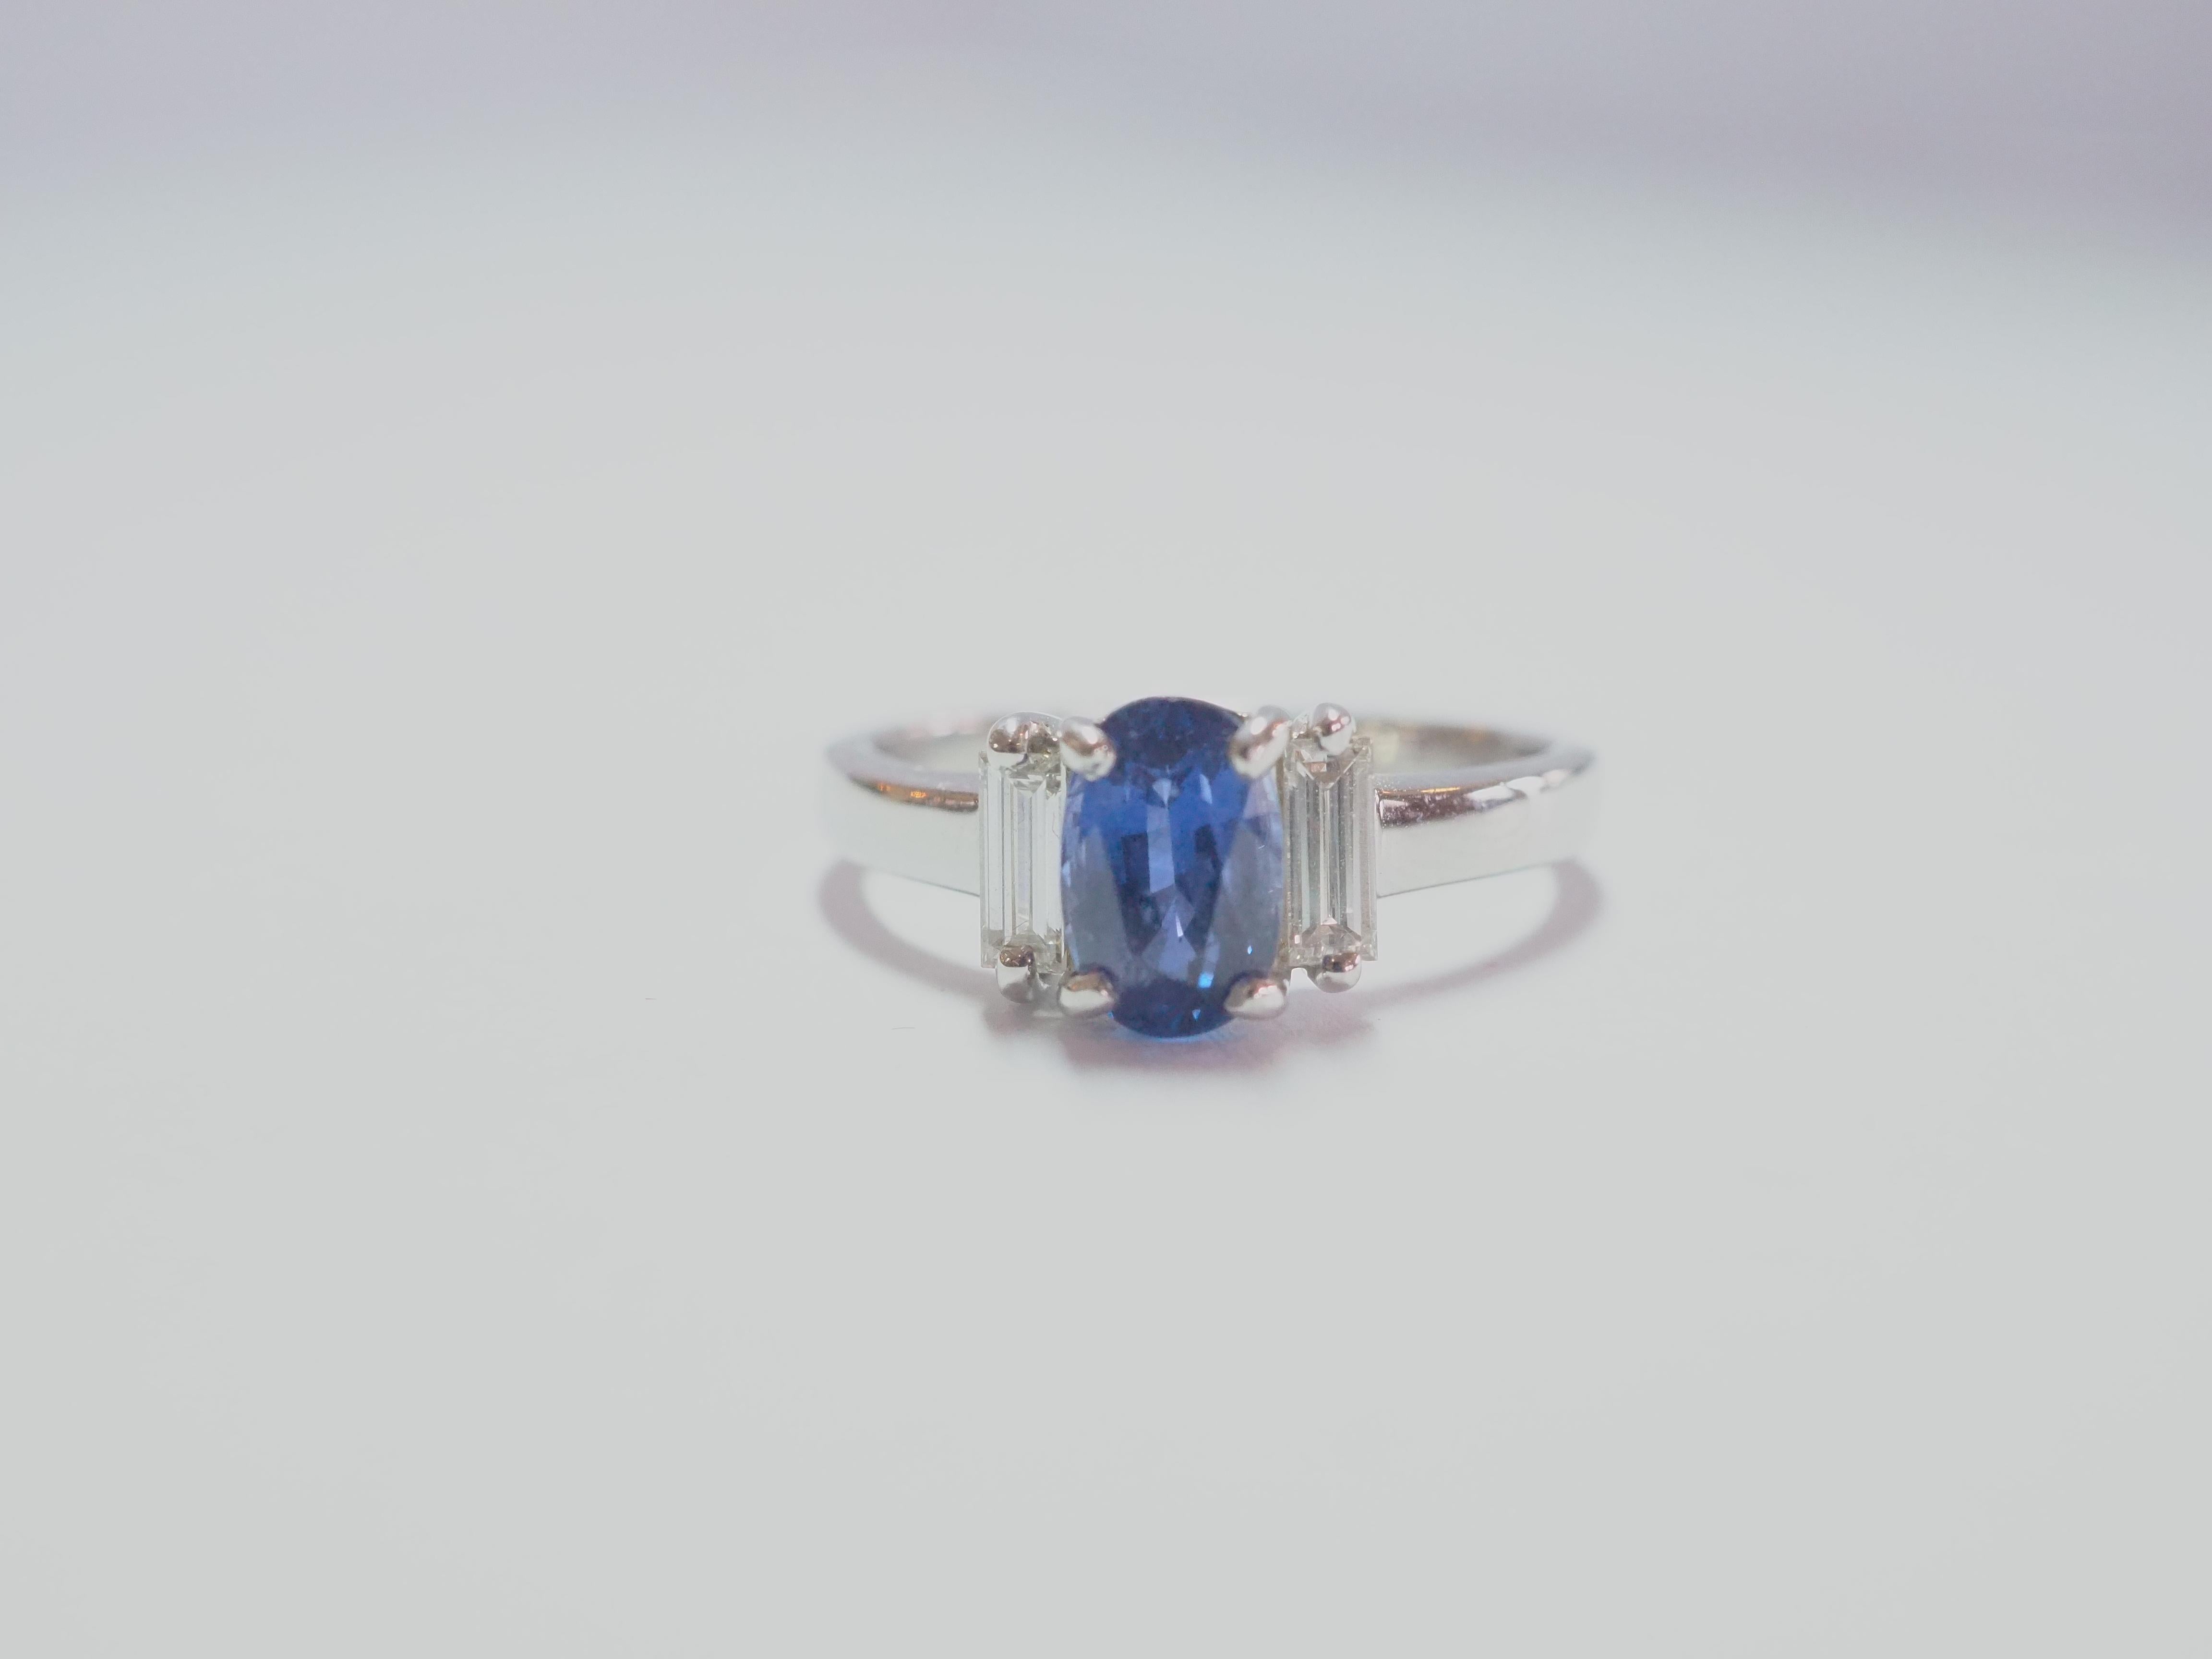 A finely crafted sapphire and diamond engagement ring. Beautiful oval blue sapphire of 1.60 carats set in the middle nicely. The blue gemstone has great brilliance and fire with very slight inclusion, very clear upon inspection by eye. There 2